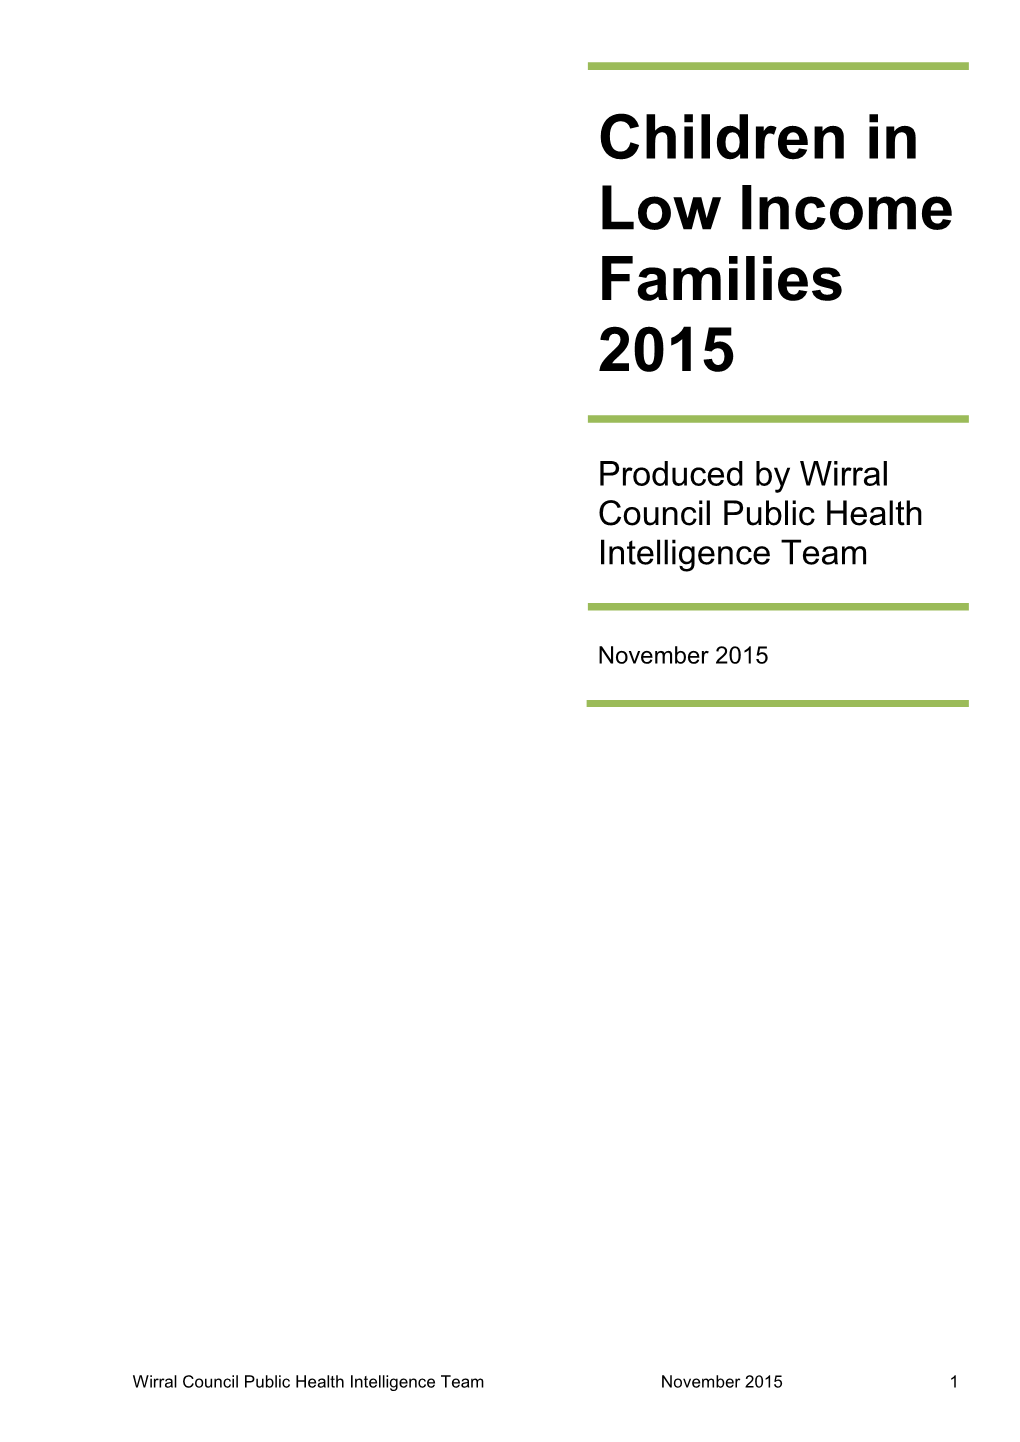 Children in Low Income Families 2015